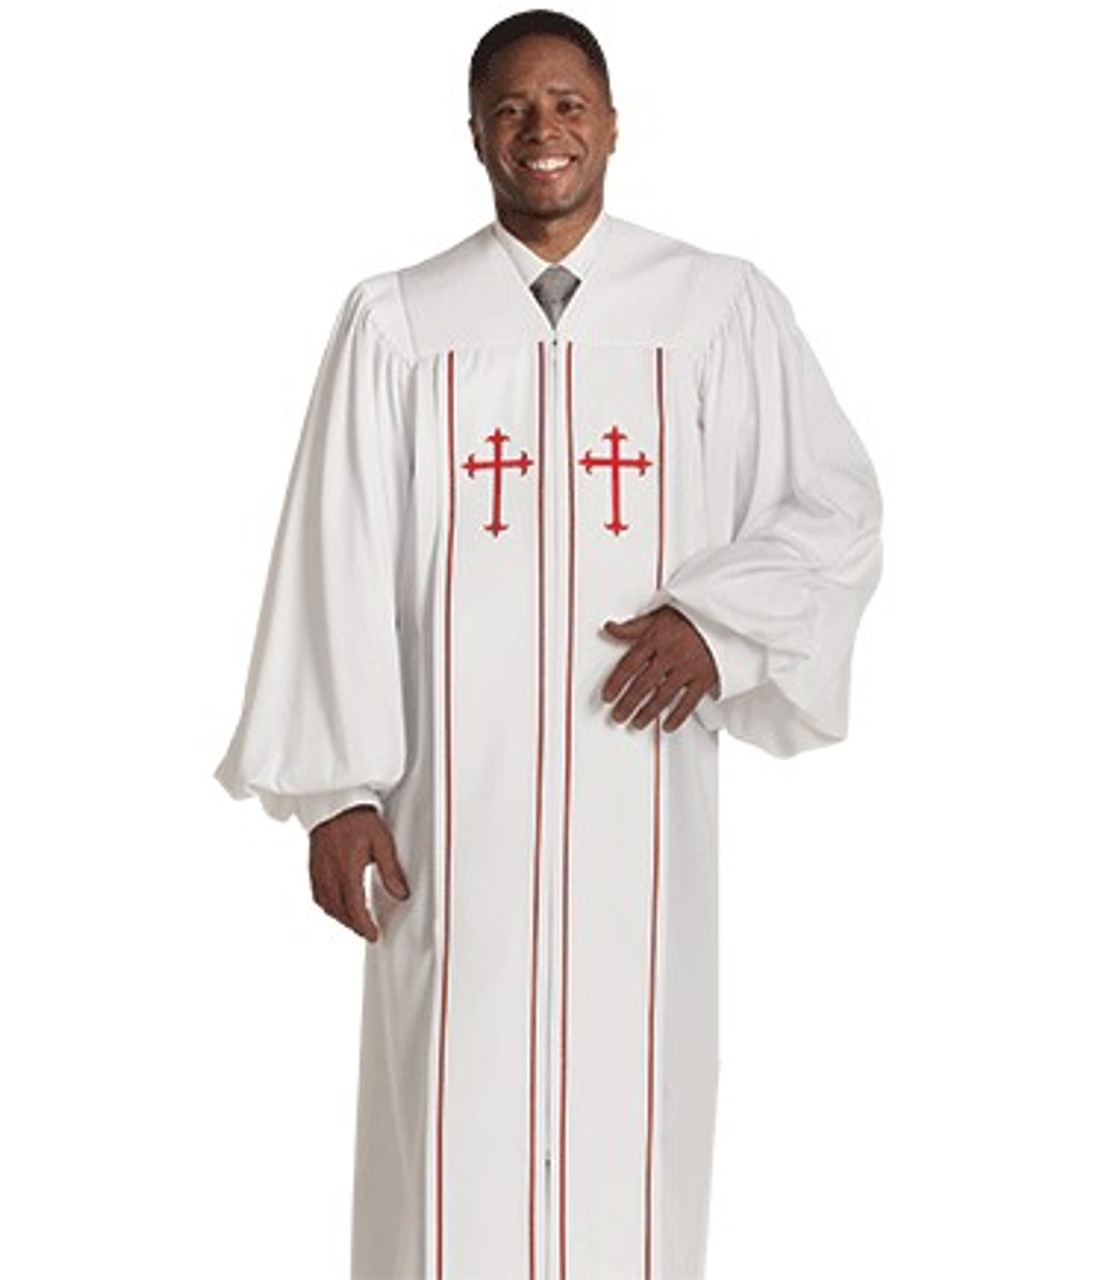 Men's Black Pulpit Robe with Red Trim - Clergy Apparel - Church Robes